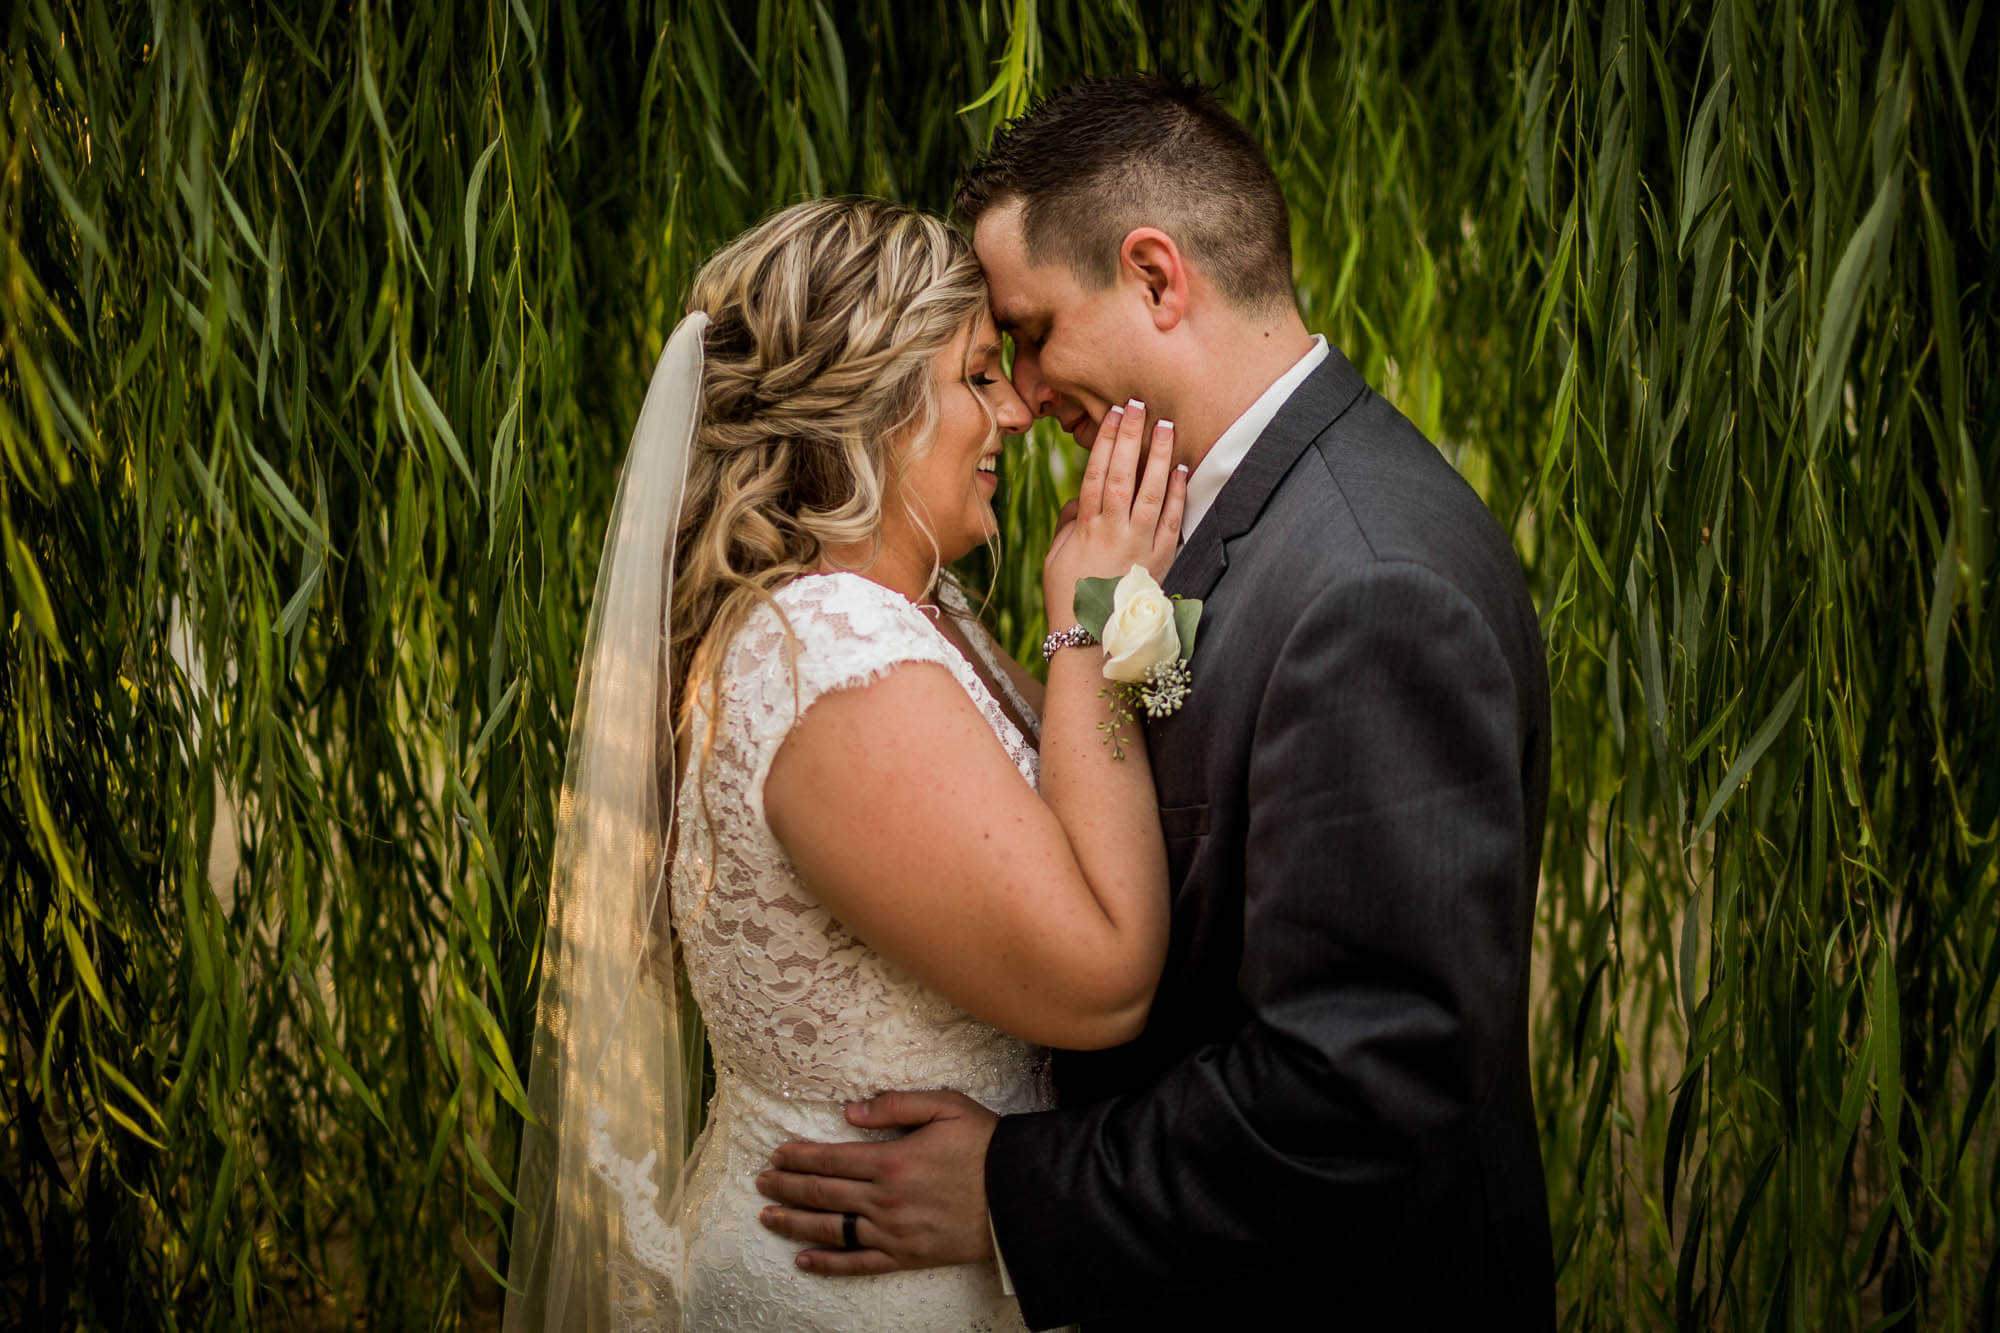 Portrait of the bride and groom in a willow tree